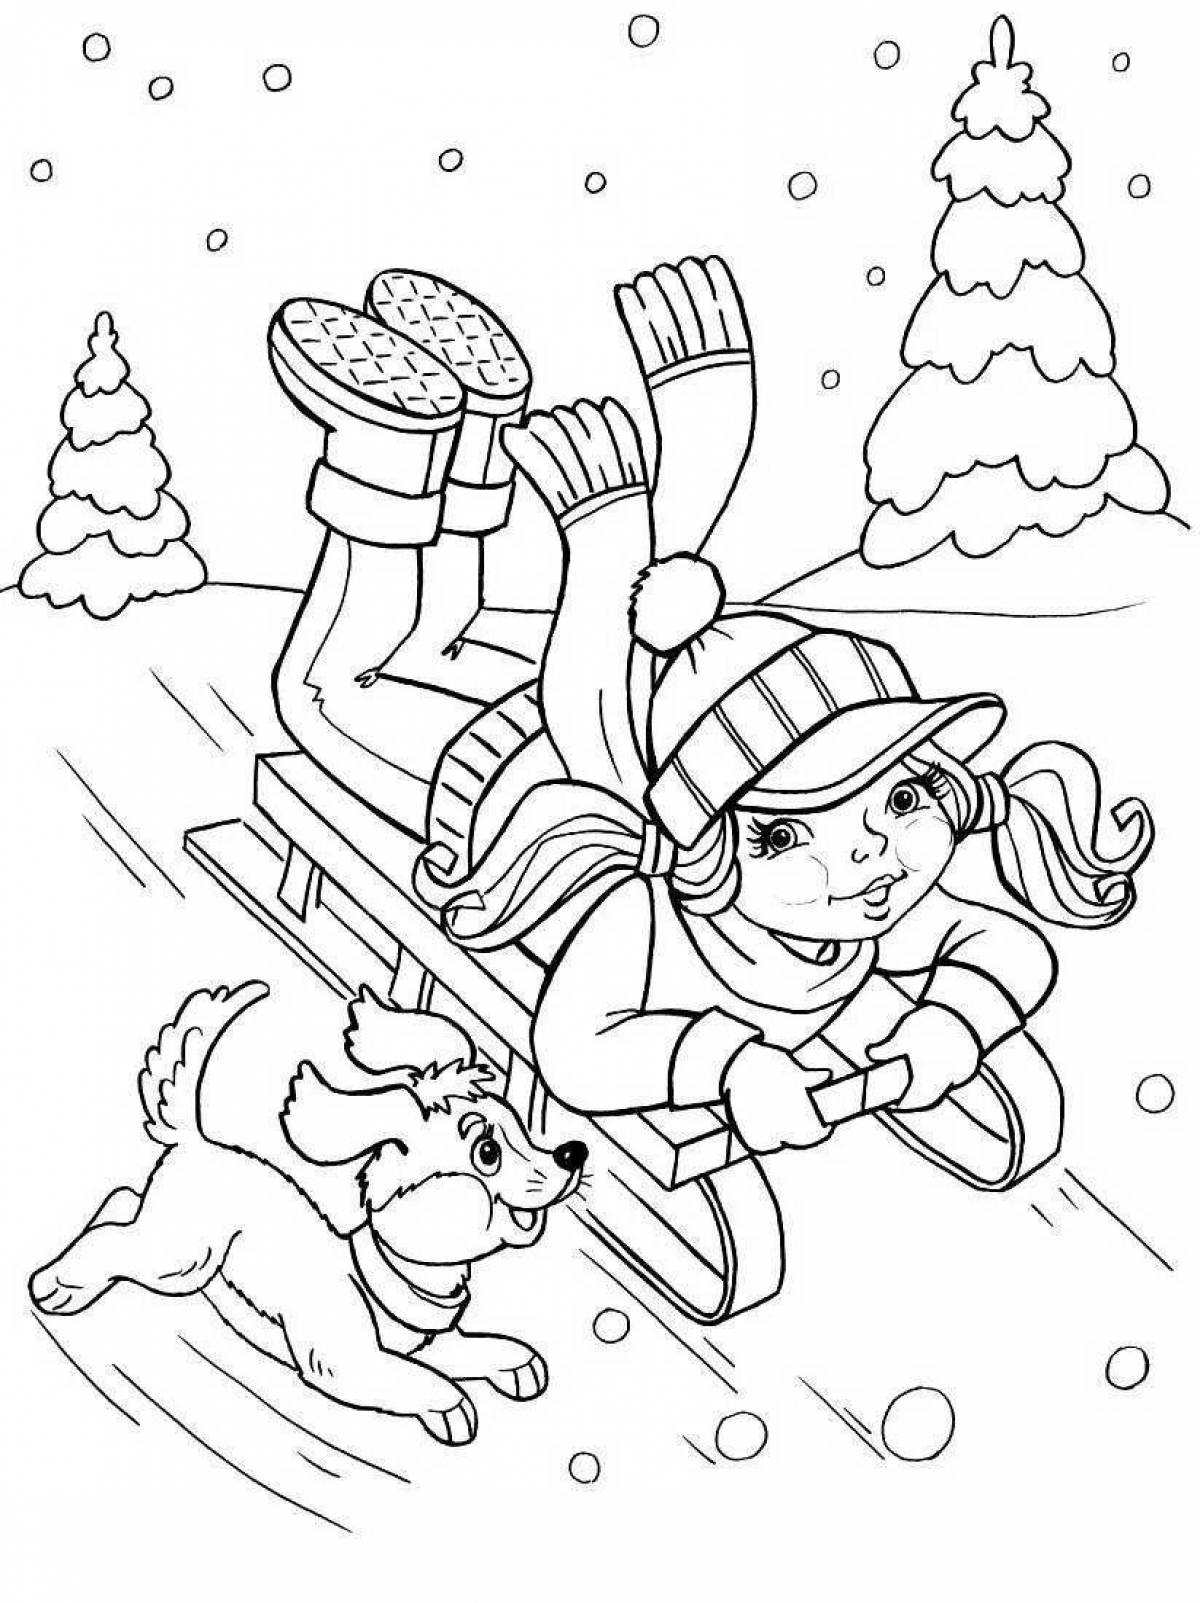 Amazing winter coloring pages for kids 6 years old